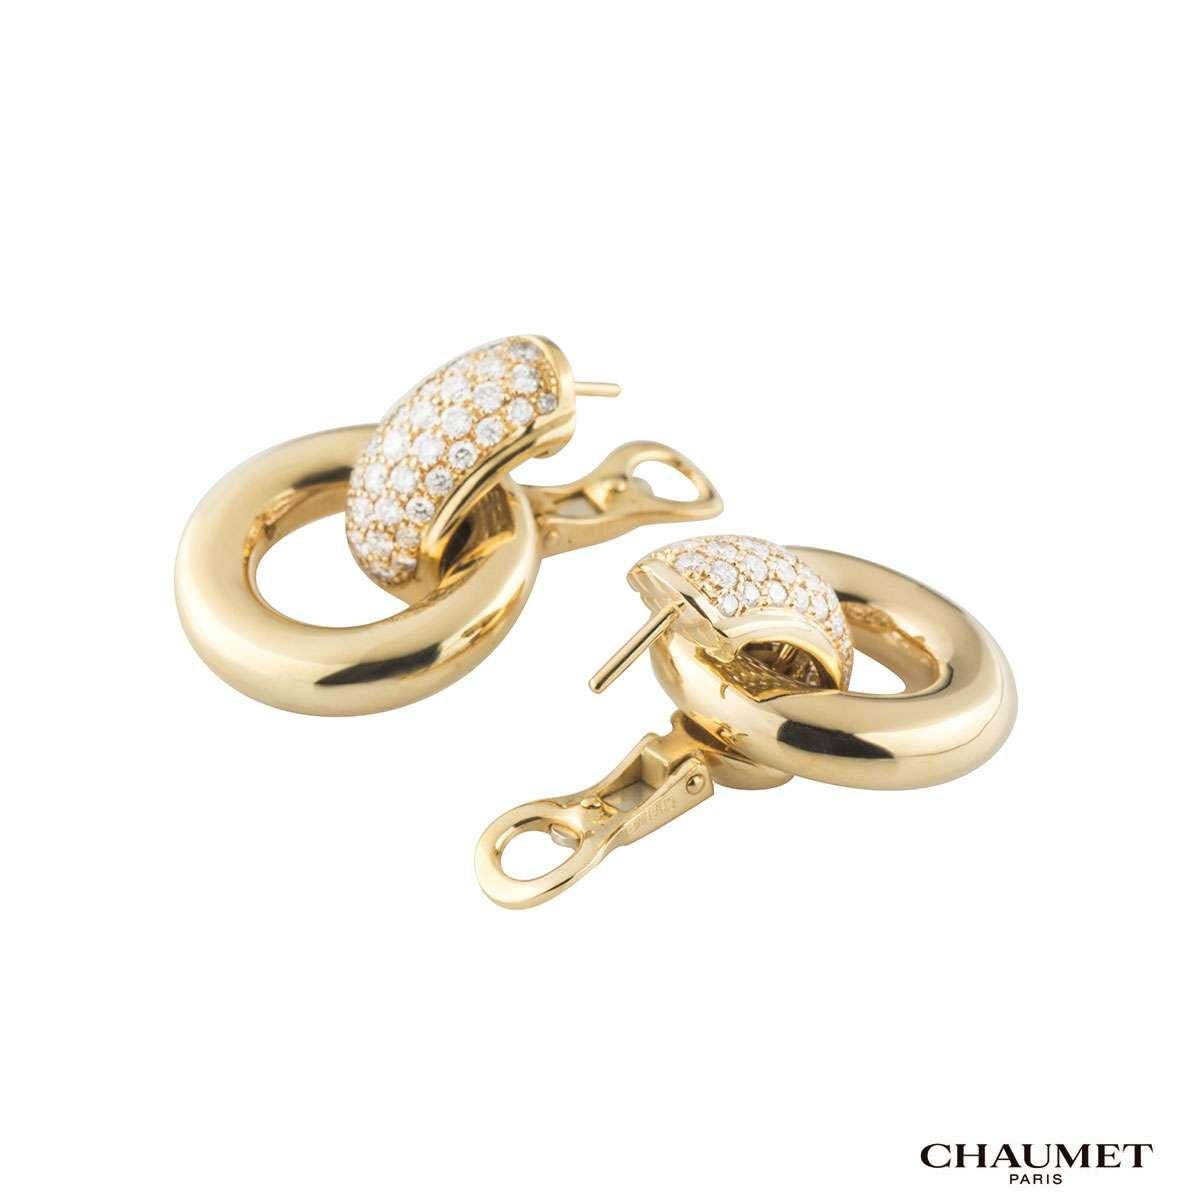 A trendy pair of 18k yellow gold Chaumet diamond hoop earrings. The earrings comprising of hoops with 5 columns of round brilliant cut diamonds in a pave setting with a total weight of approximately 2.10ct, predominantly G colour and VS clarity.